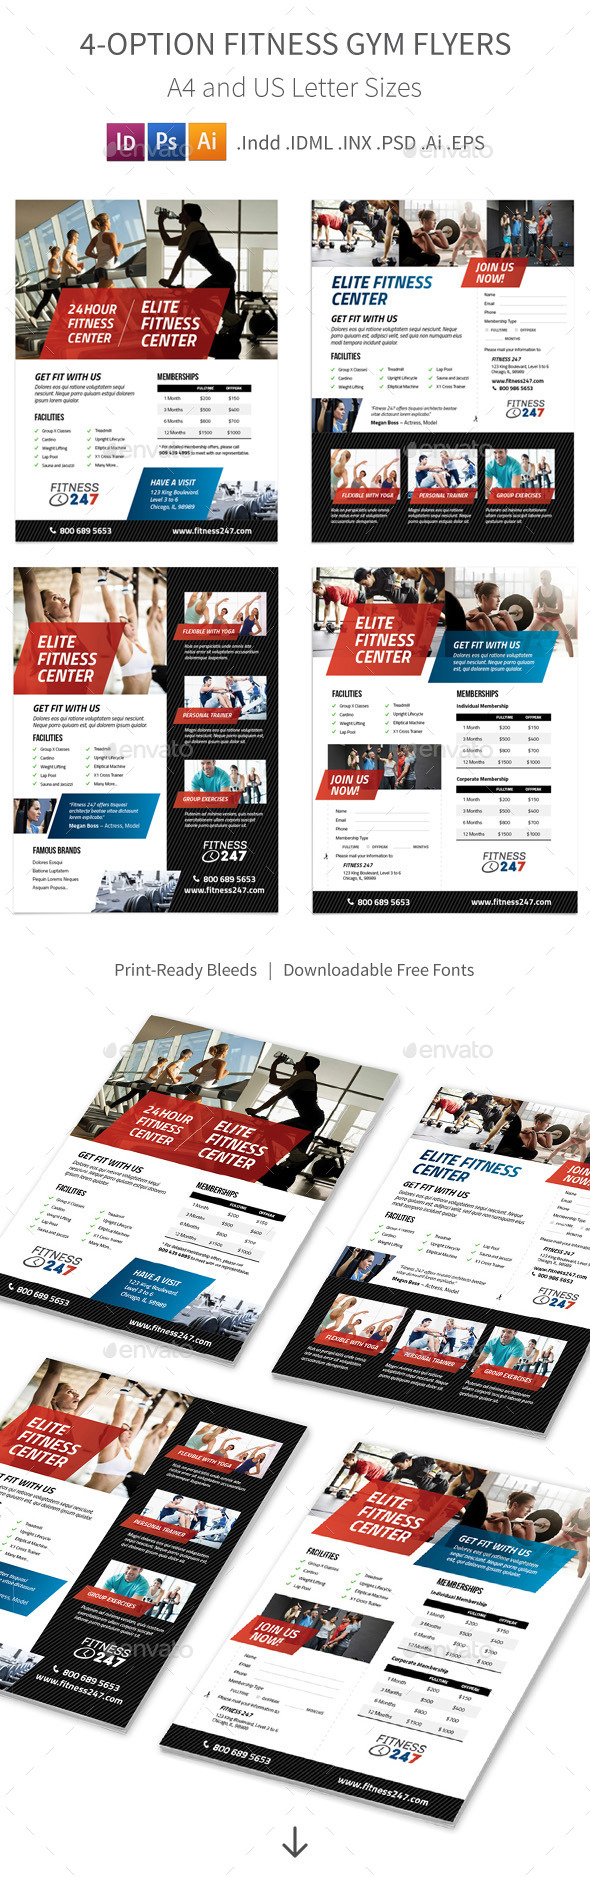 Fitness Gym Flyers – 4 Options